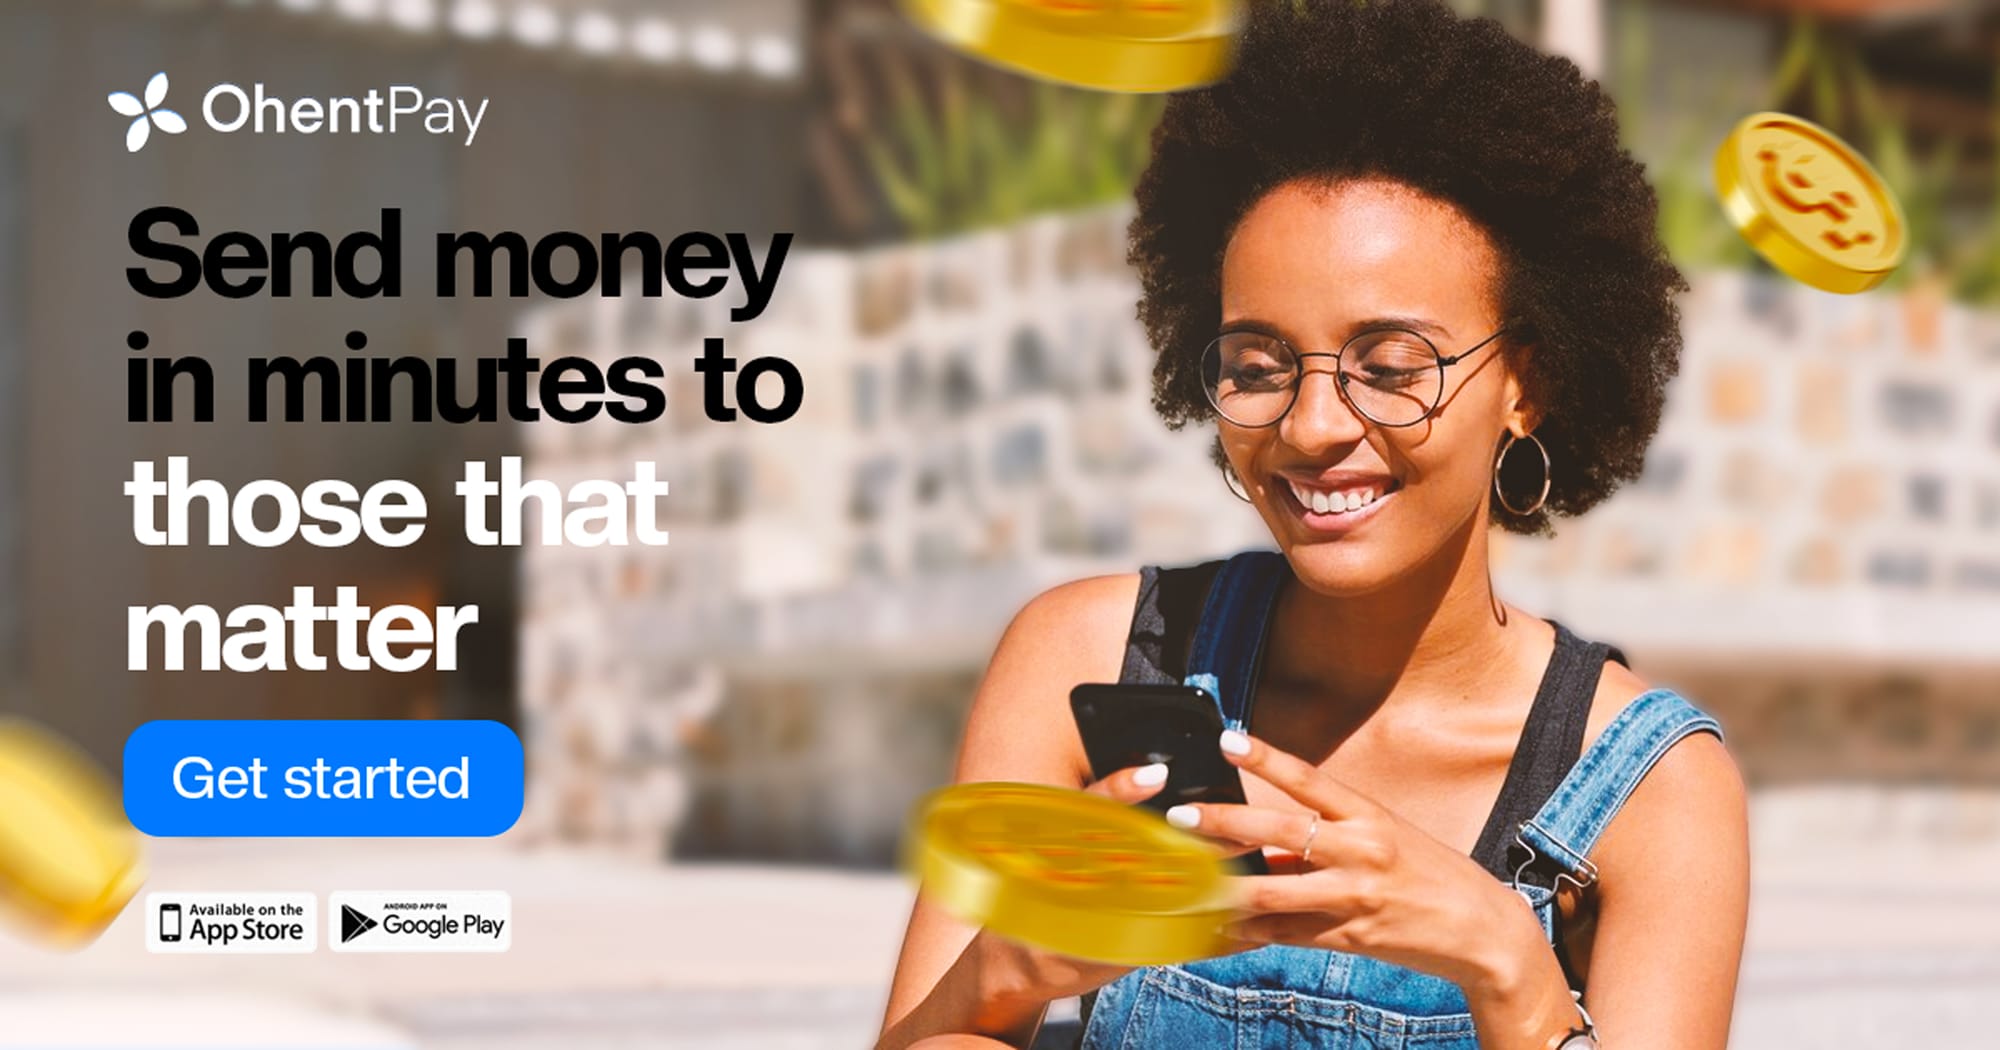 Send money to loved ones in minutes